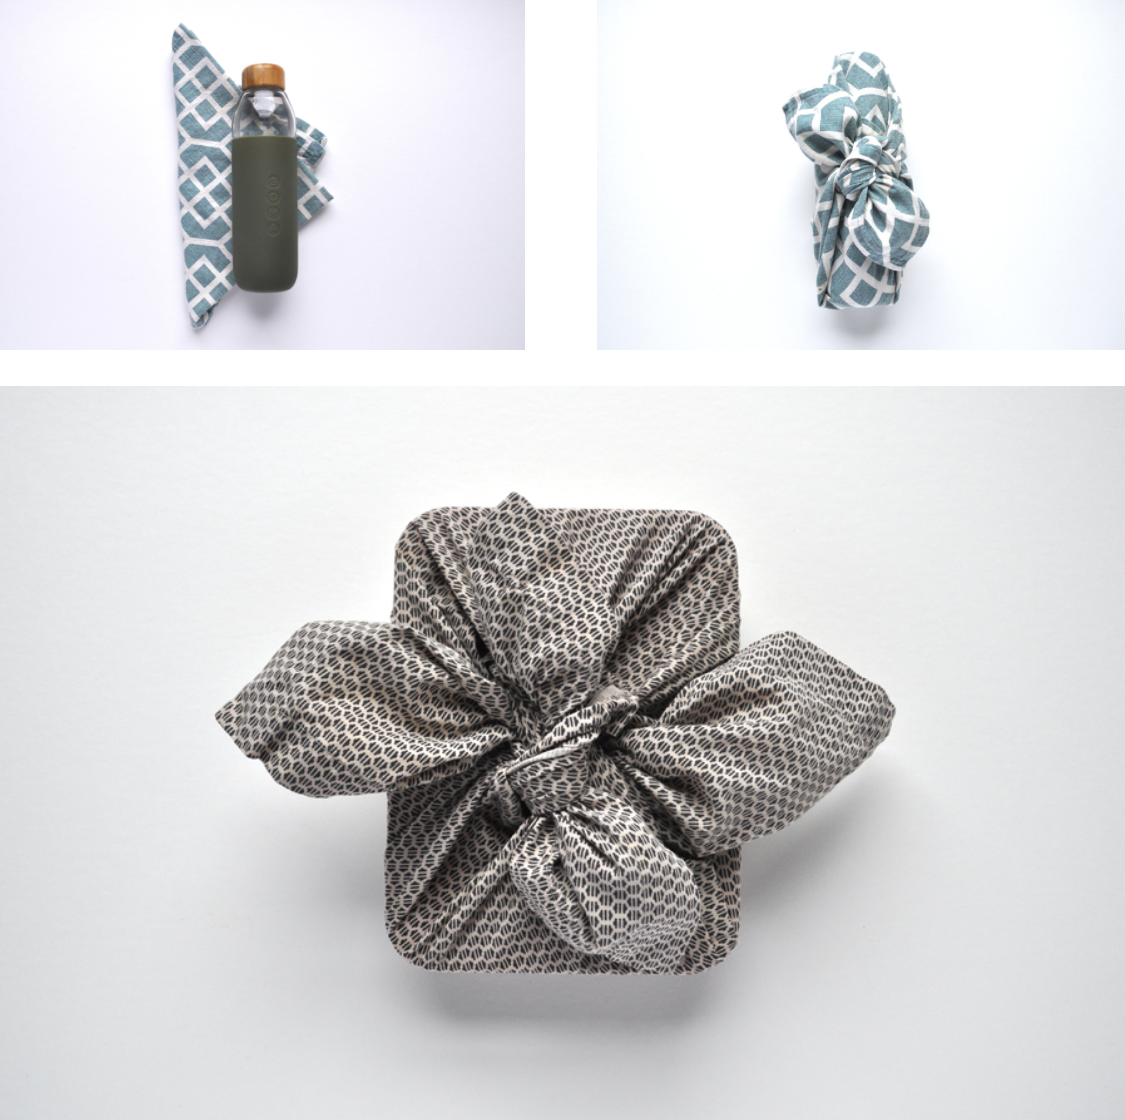 Images of the Furoshiki wrapping technique - eco friendly gift wrapping without the waste